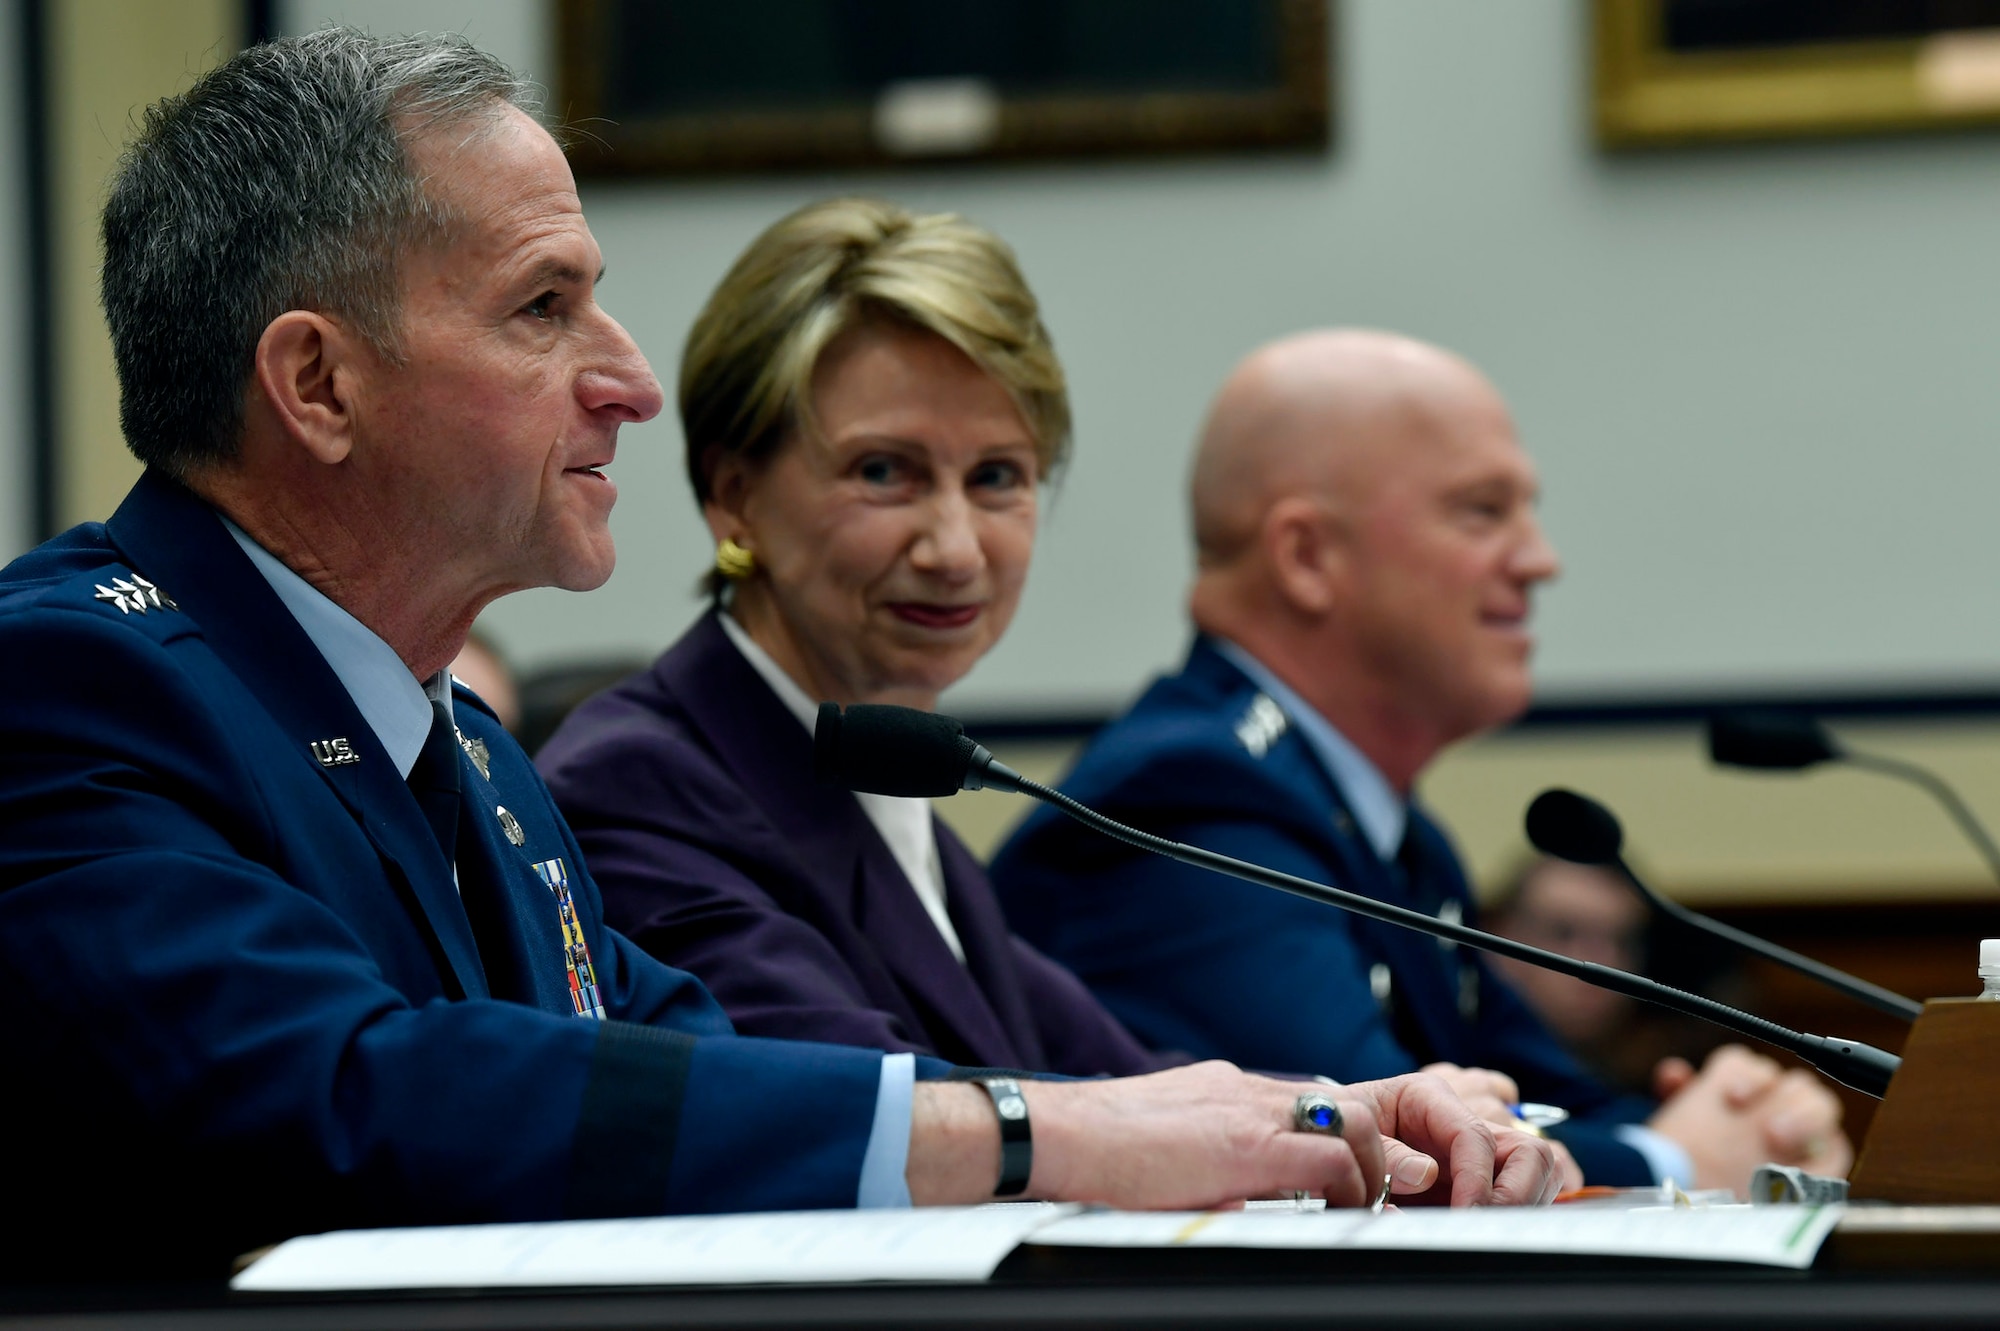 Air Force Chief of Staff Gen. David L. Goldfein testifies before the House Armed Services Committee in Washington, D.C., March 4, 2020. Goldfein talked about the fiscal year 2021 National Defense Authorization Budget request for the Department of the Air Force. (U.S. Air Force photo by Wayne Clark)